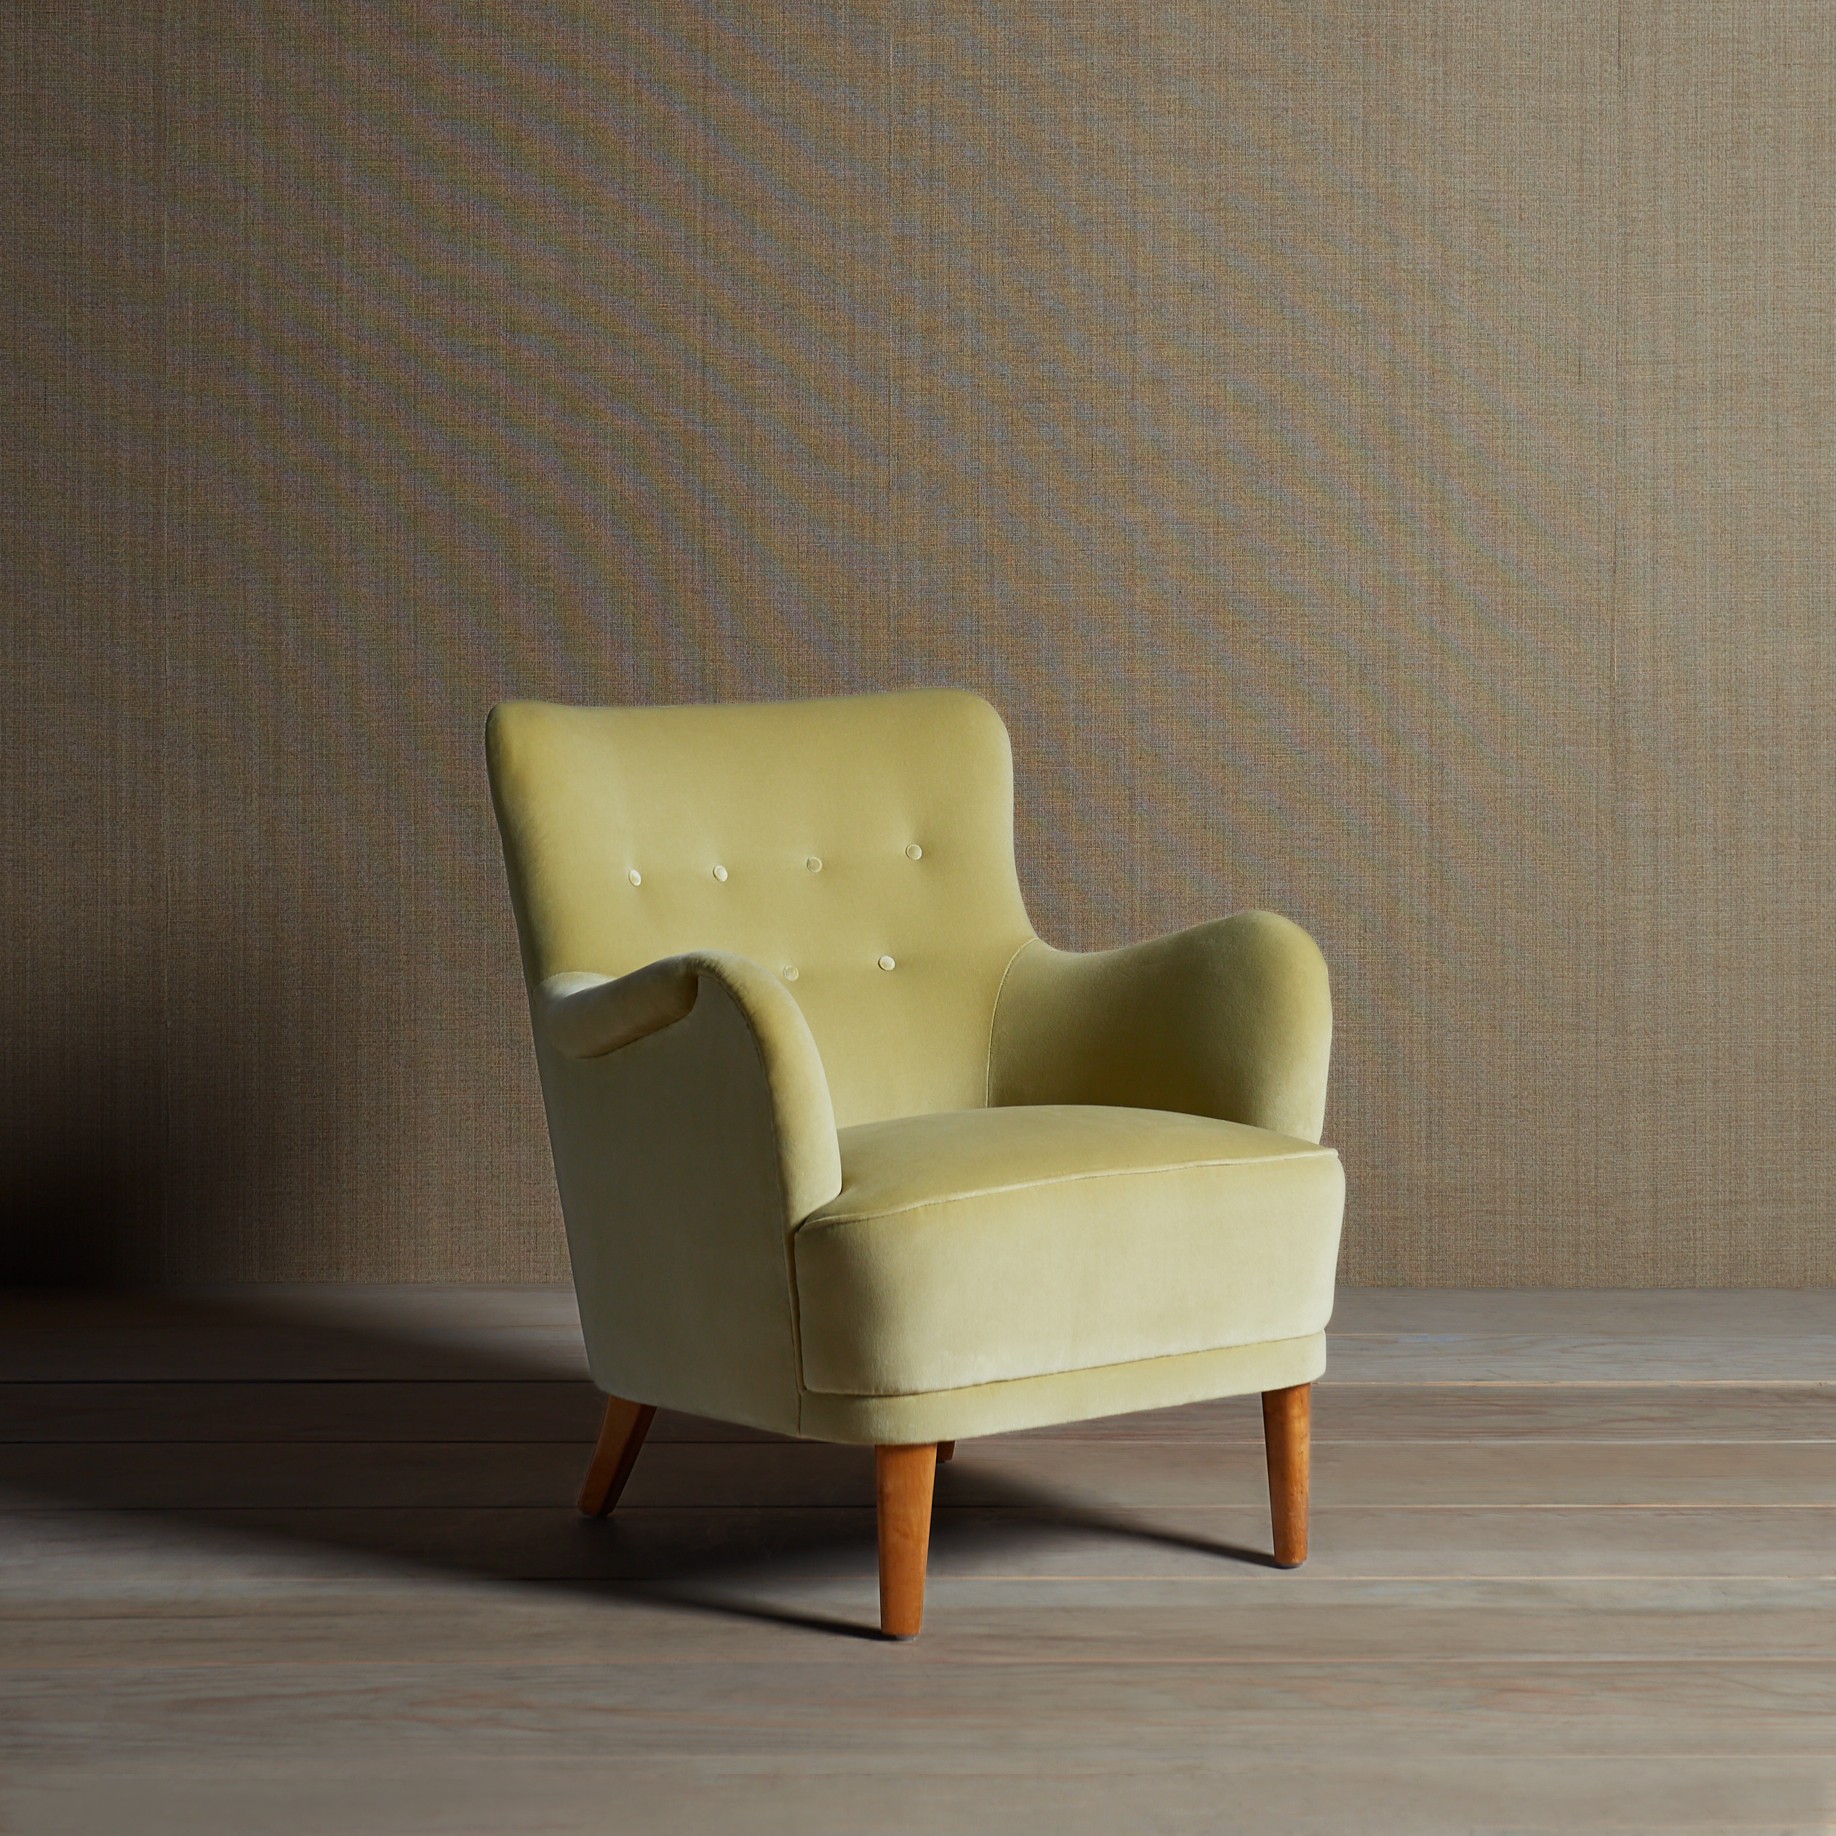 a yellow chair sitting on top of a hard wood floor